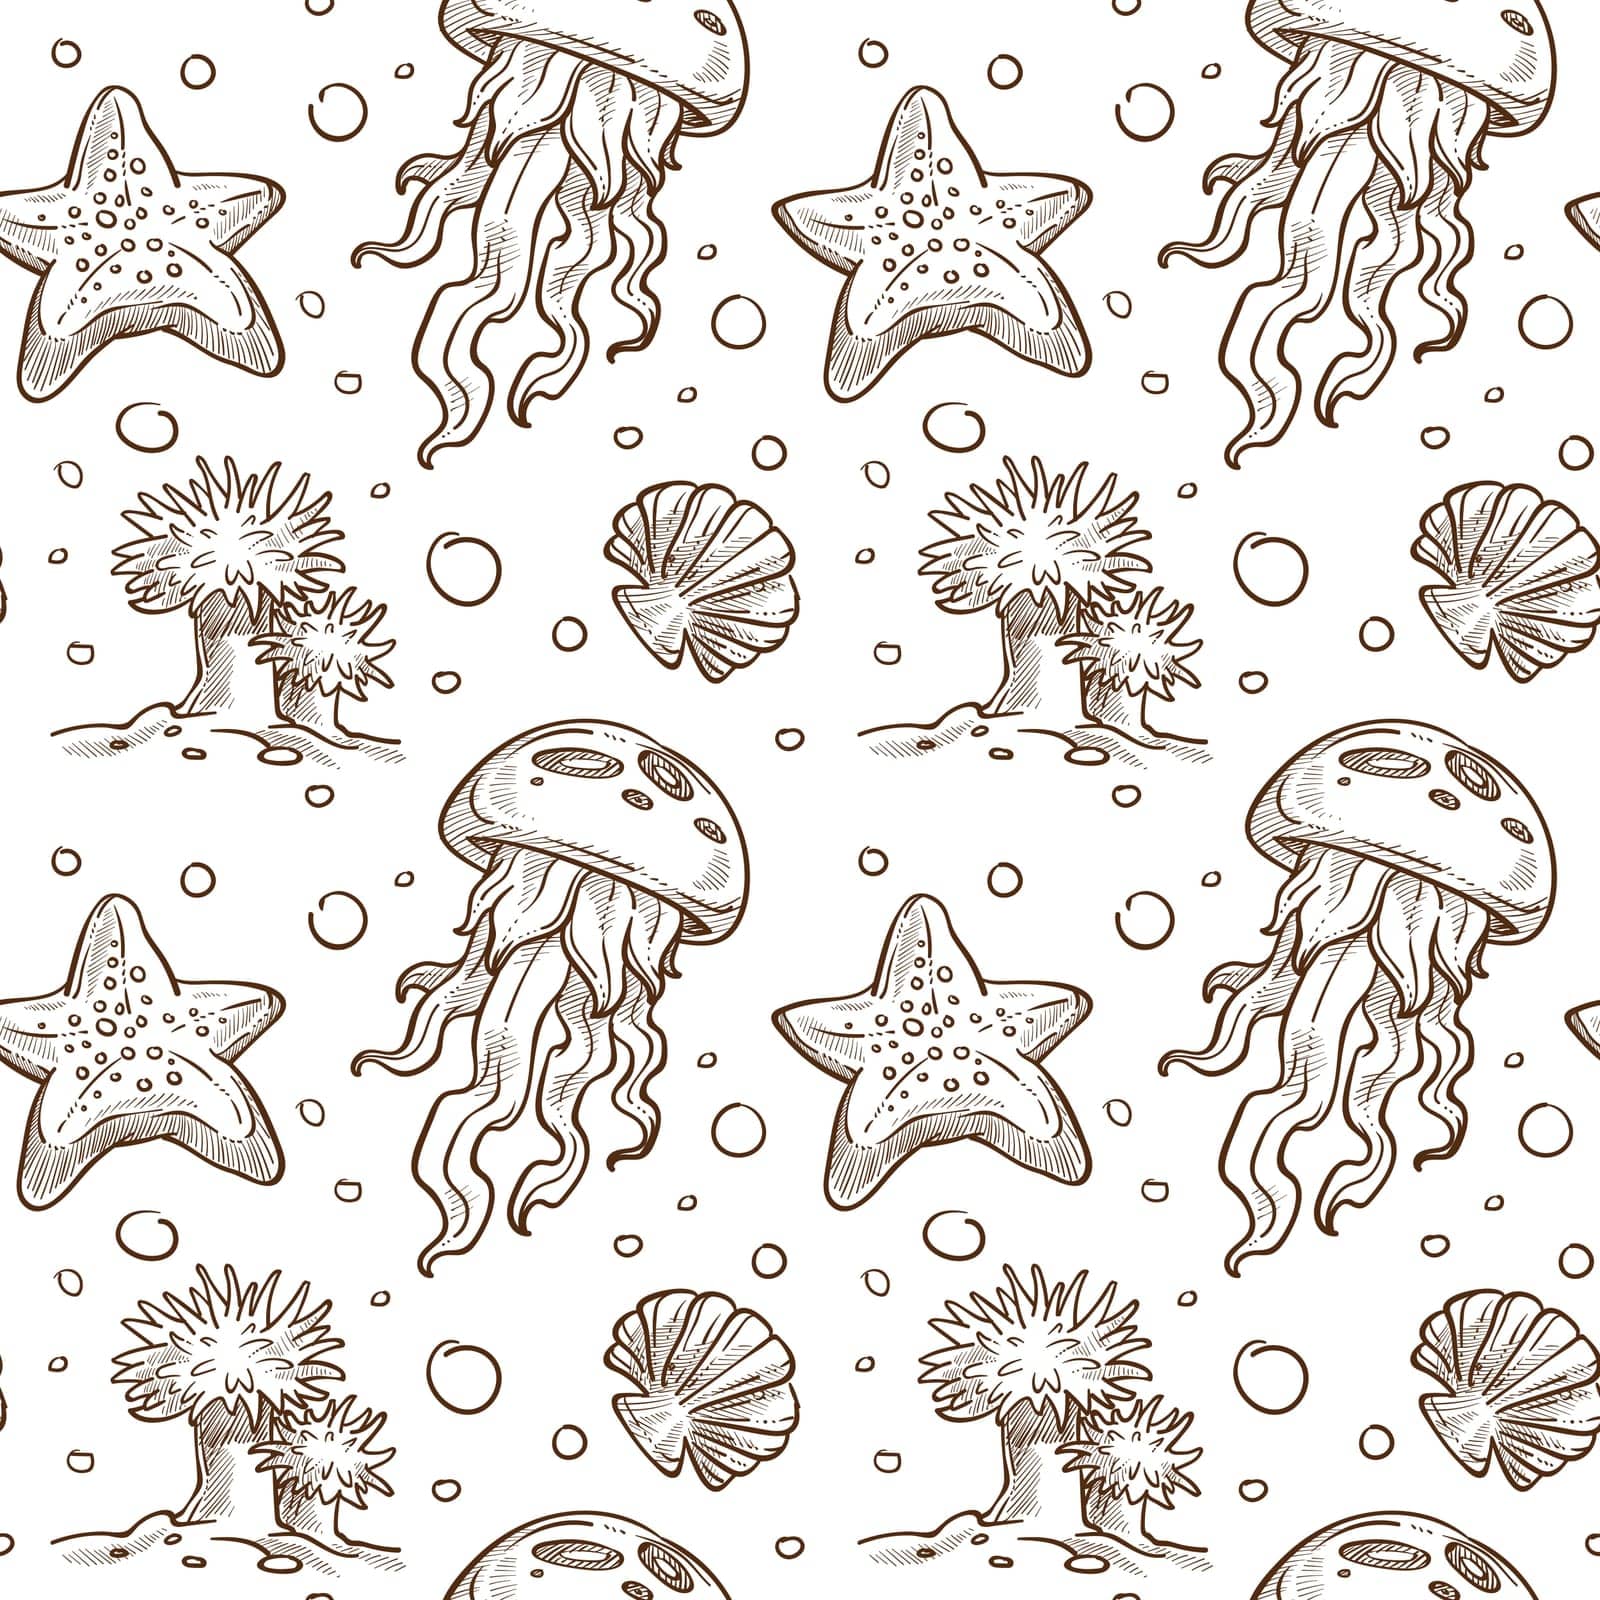 Marine sealife, conches and medusa pattern print by Sonulkaster